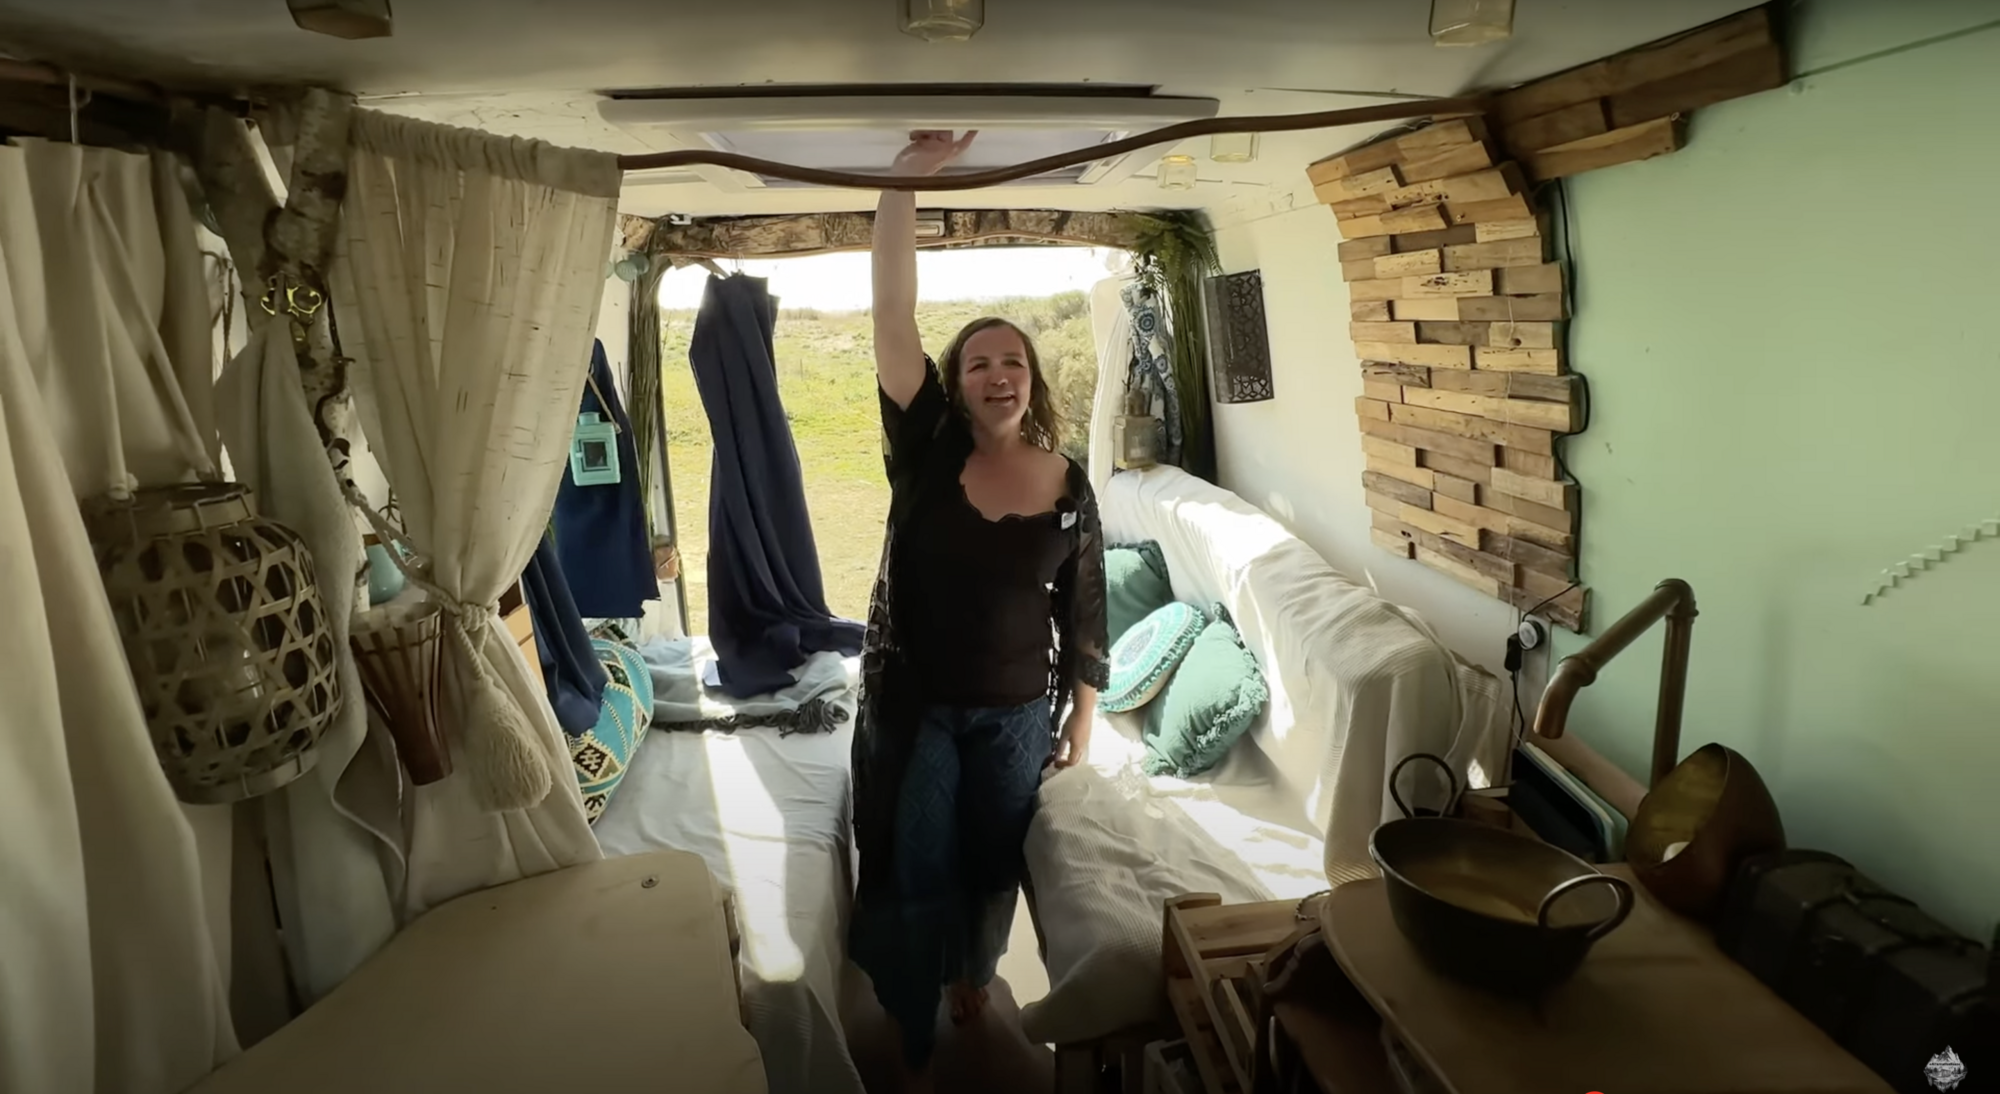 A woman turned her old minivan into a $4,500 dream home: what it looks like from the inside out